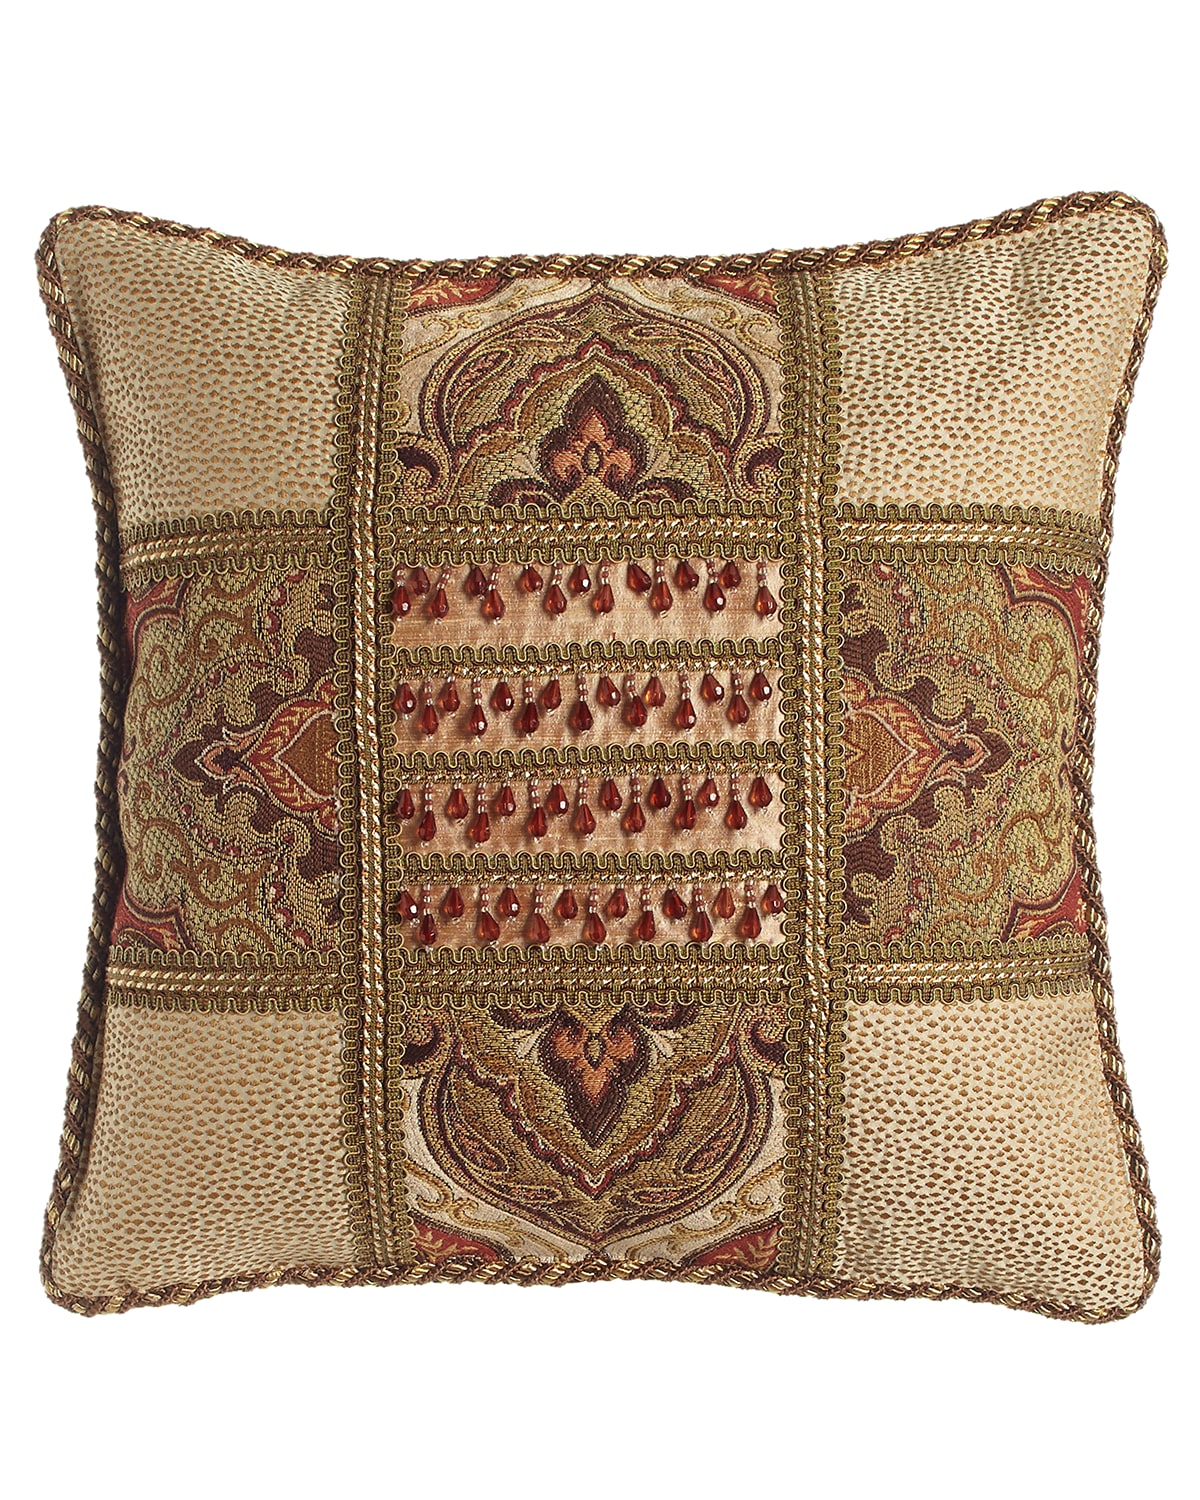 Image Dian Austin Couture Home Mediterrane Patch Pillow with Beaded Silk Center, 18"Sq.